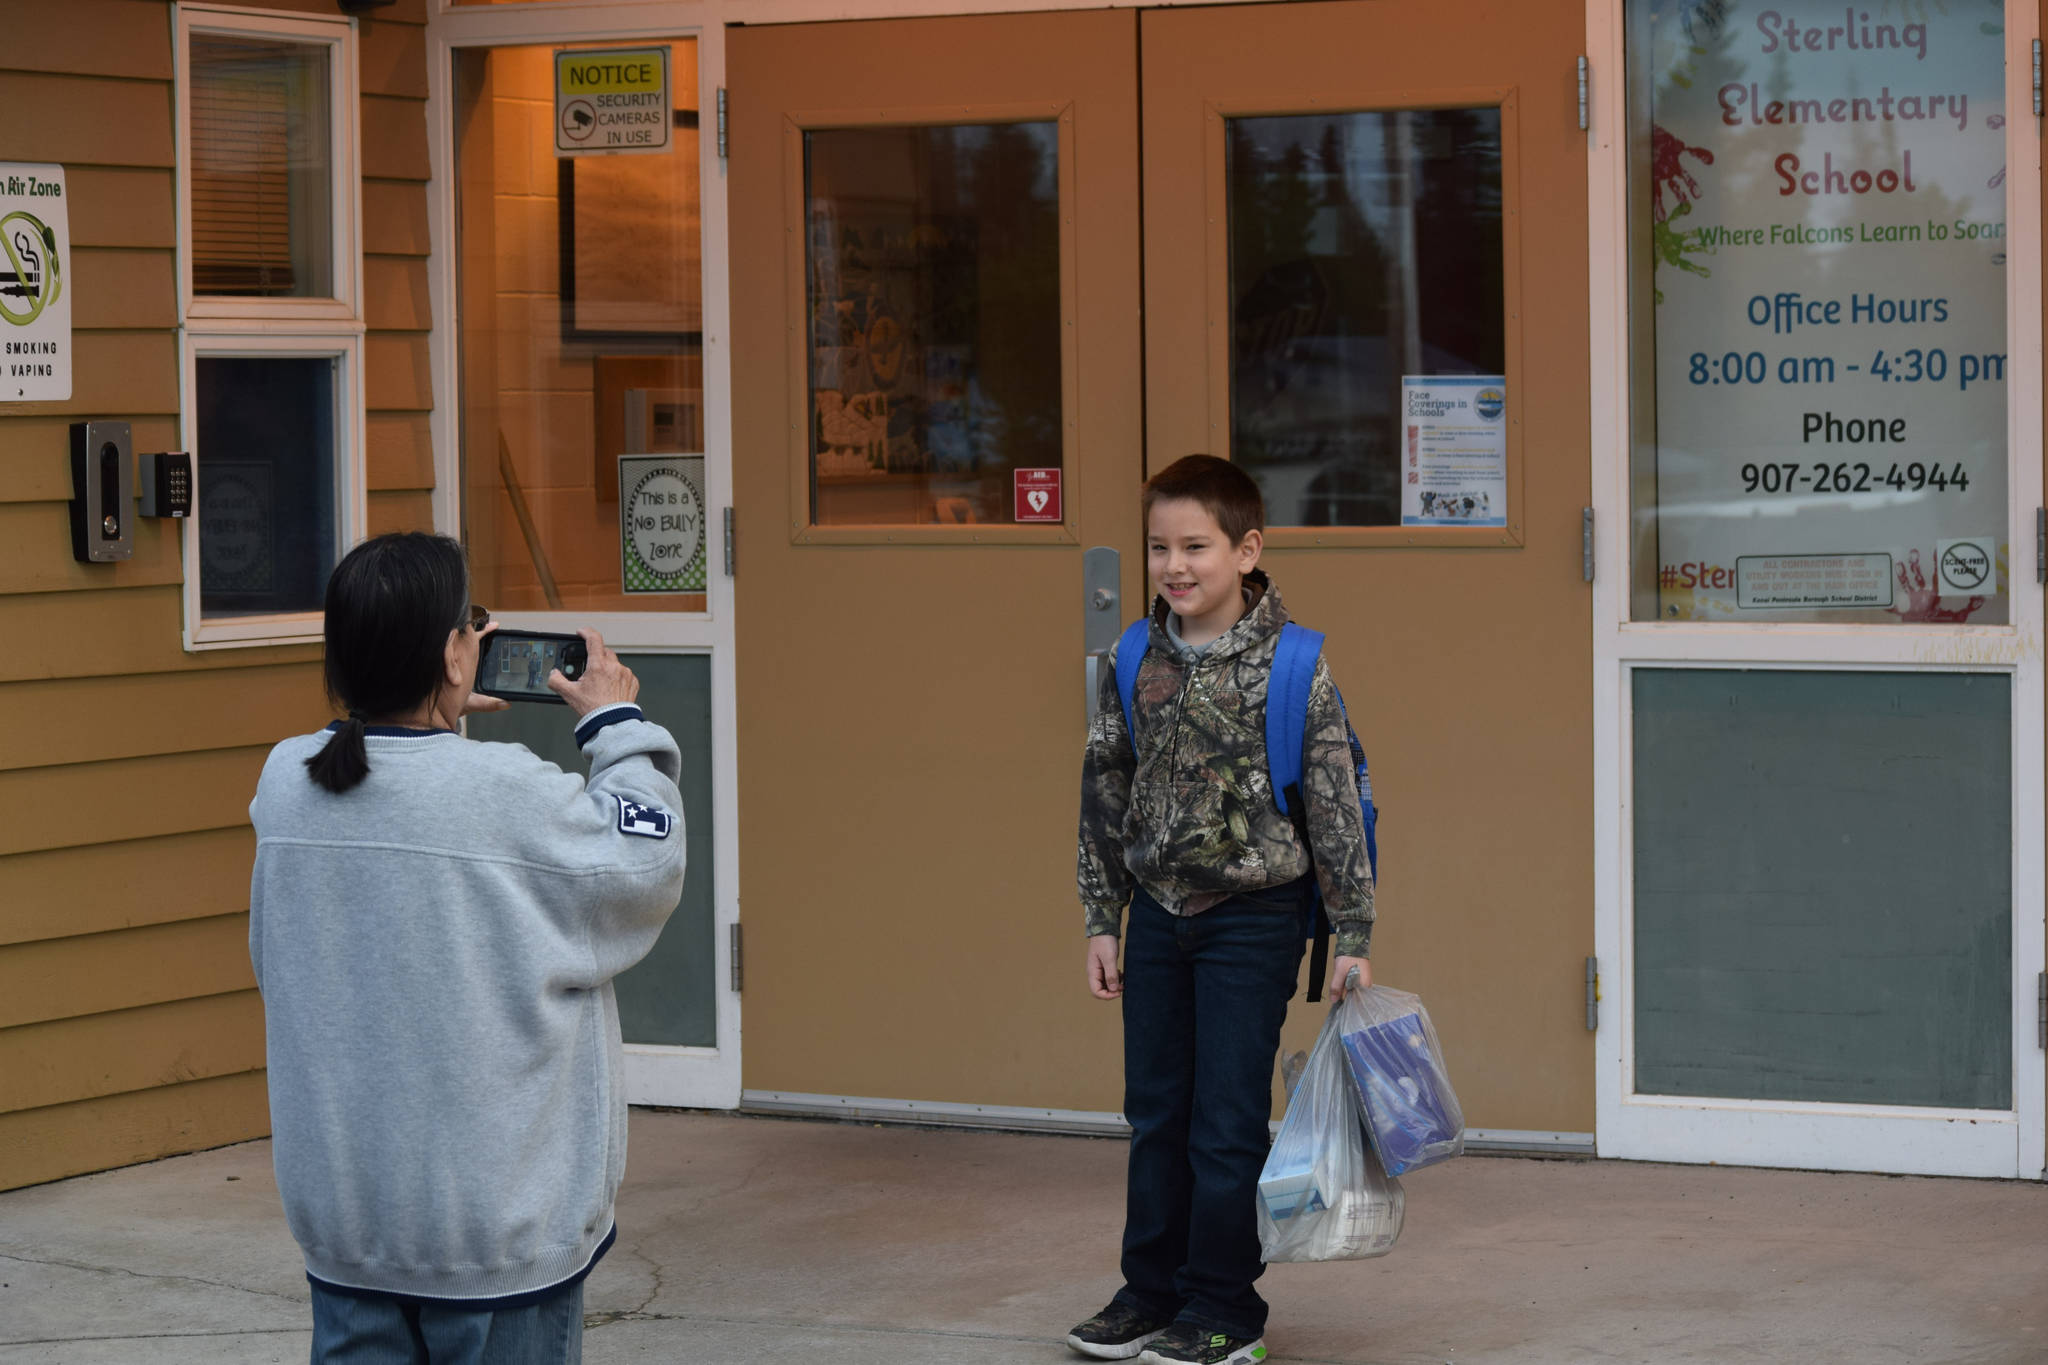 Cordy Watts takes a photo of her great-grandson Ryan Pierren on his first day of third grade at Sterling Elementary School on Tuesday, Aug. 17, 2021. (Camille Botello/Peninsula Clarion)